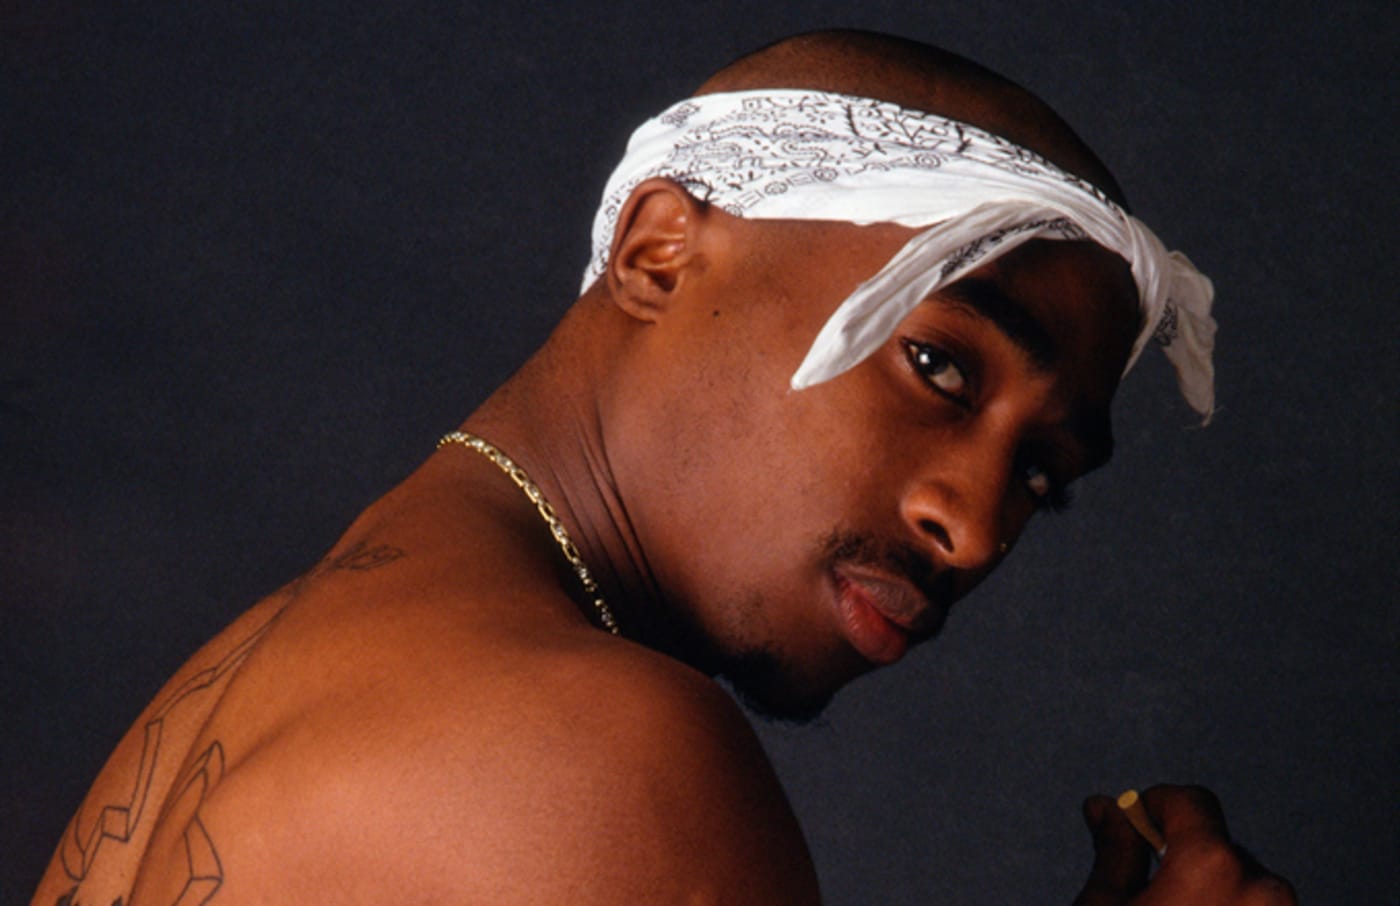 2Pac photograph by Chi Modu